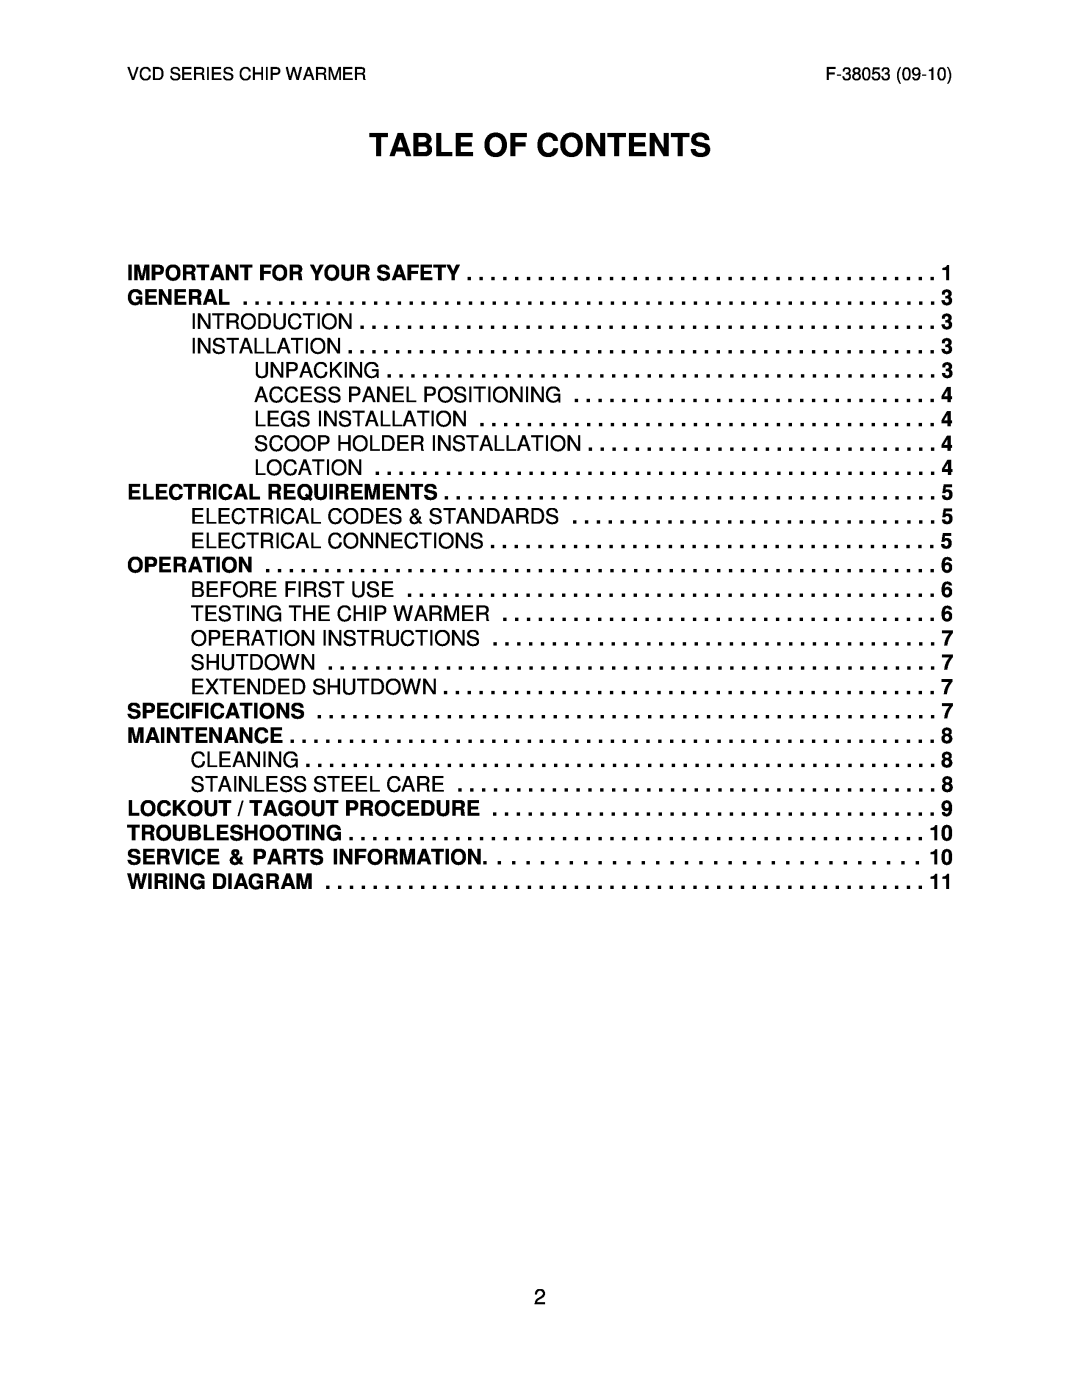 Vulcan-Hart VCD44 ML-138069, VCD22* ML-138037 operation manual Table Of Contents 